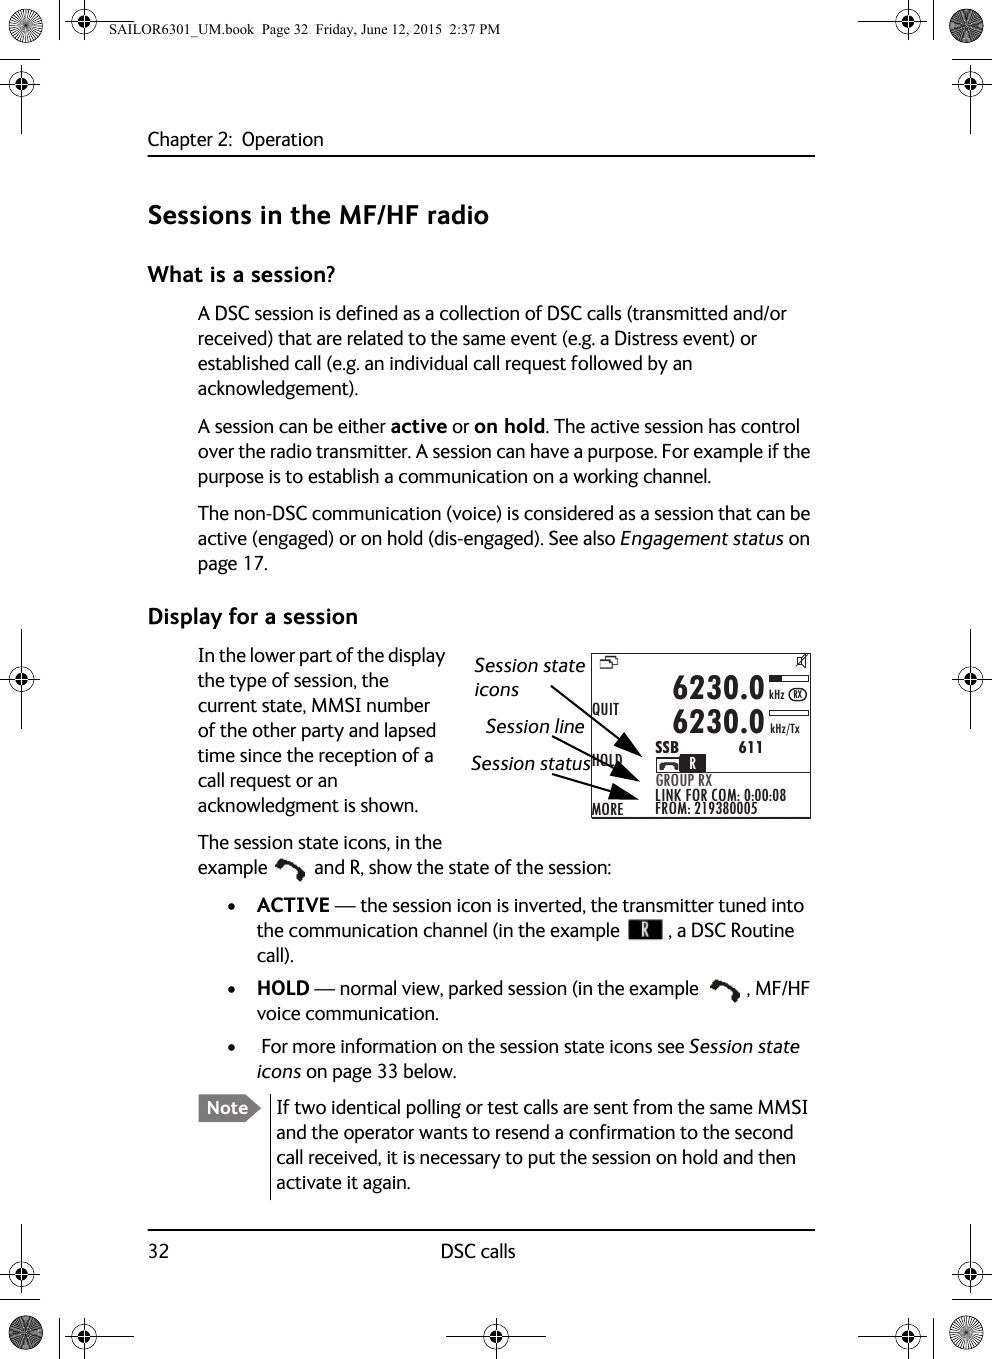 Chapter 2:  Operation32 DSC callsSessions in the MF/HF radioWhat is a session?A DSC session is defined as a collection of DSC calls (transmitted and/or received) that are related to the same event (e.g. a Distress event) or established call (e.g. an individual call request followed by an acknowledgement).A session can be either active or on hold. The active session has control over the radio transmitter. A session can have a purpose. For example if the purpose is to establish a communication on a working channel. The non-DSC communication (voice) is considered as a session that can be active (engaged) or on hold (dis-engaged). See also Engagement status on page 17.Display for a sessionIn the lower part of the display the type of session, the current state, MMSI number of the other party and lapsed time since the reception of a call request or an acknowledgment is shown.The session state icons, in the example  and R, show the state of the session:•ACTIVE — the session icon is inverted, the transmitter tuned into the communication channel (in the example  , a DSC Routine call).•HOLD — normal view, parked session (in the example , MF/HF voice communication.•  For more information on the session state icons see Session state icons on page 33 below.Note If two identical polling or test calls are sent from the same MMSI and the operator wants to resend a confirmation to the second call received, it is necessary to put the session on hold and then activate it again.QUITHOLDMOREGROUP RXLINK FOR COM: 0:00:08FROM: 2193800056230.06230.0SSB              611kHz/TxkHzRXRSession state Session lineSession statusiconsSAILOR6301_UM.book  Page 32  Friday, June 12, 2015  2:37 PM